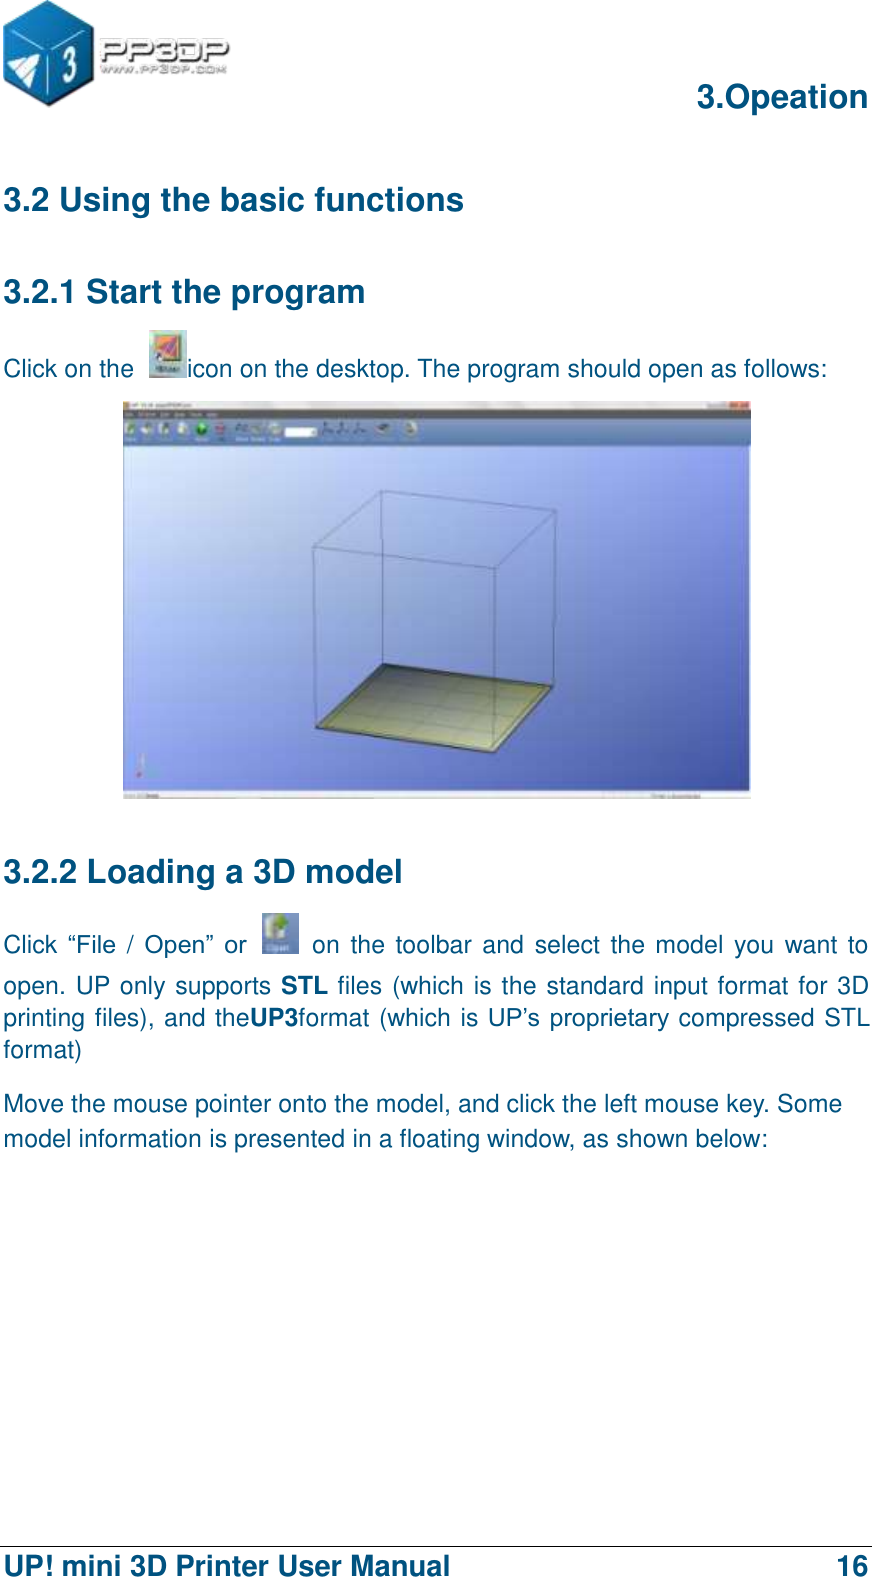      3.Opeation  UP! mini 3D Printer User Manual                                16 3.2 Using the basic functions 3.2.1 Start the program Click on the  icon on the desktop. The program should open as follows:  3.2.2 Loading a 3D model Click “File / Open”  or    on the toolbar and select the model you want to open. UP only supports STL files (which is the standard input format for 3D printing files), and theUP3format (which is UP‟s proprietary compressed STL format) Move the mouse pointer onto the model, and click the left mouse key. Some model information is presented in a floating window, as shown below: 